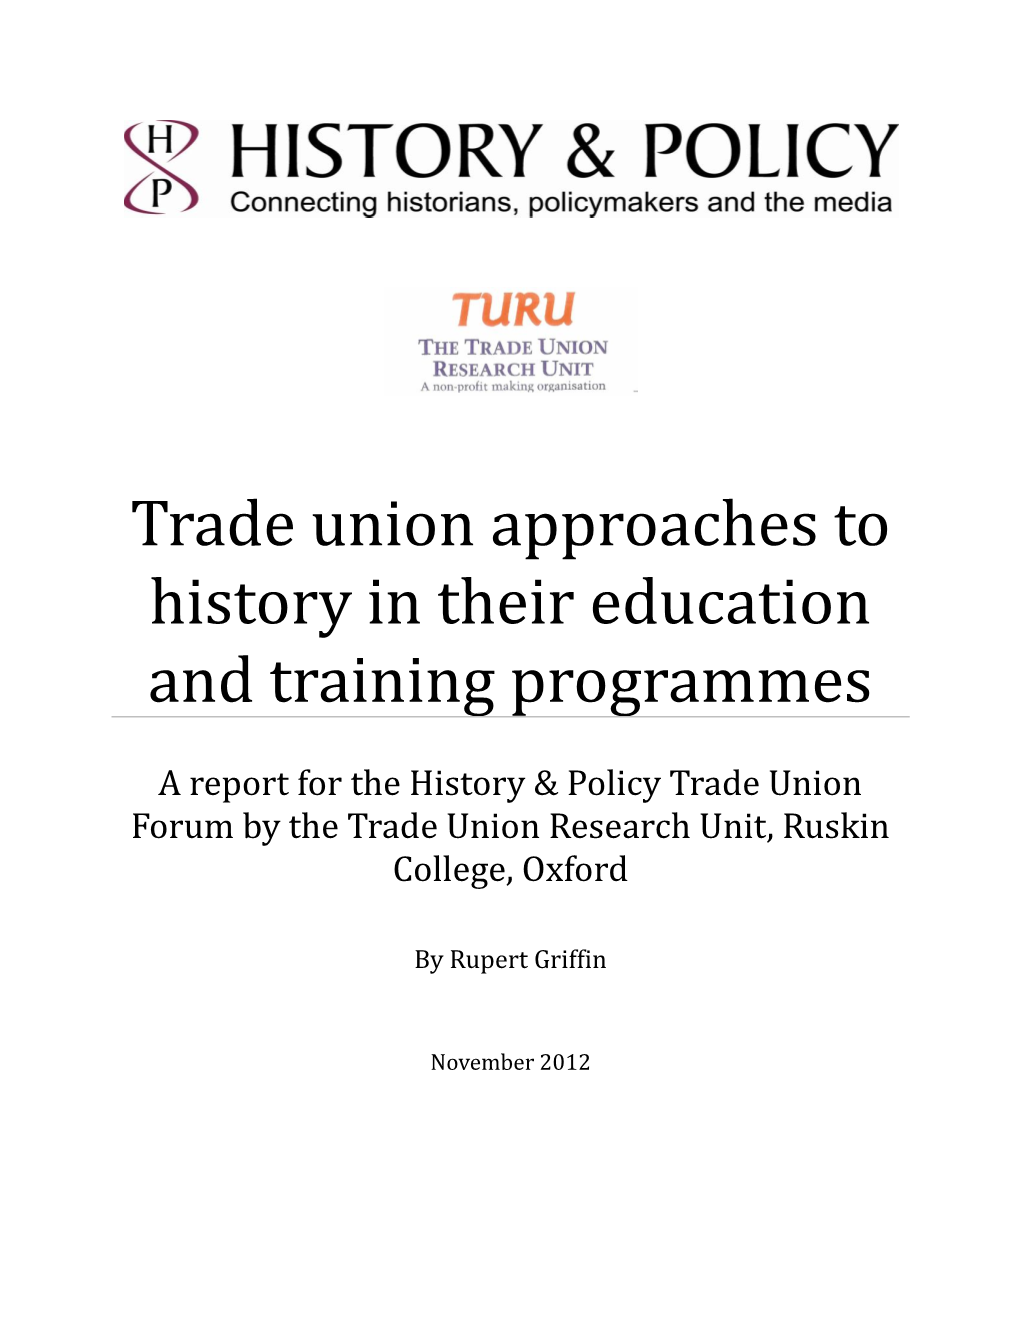 Trade Union Approaches to History in Education